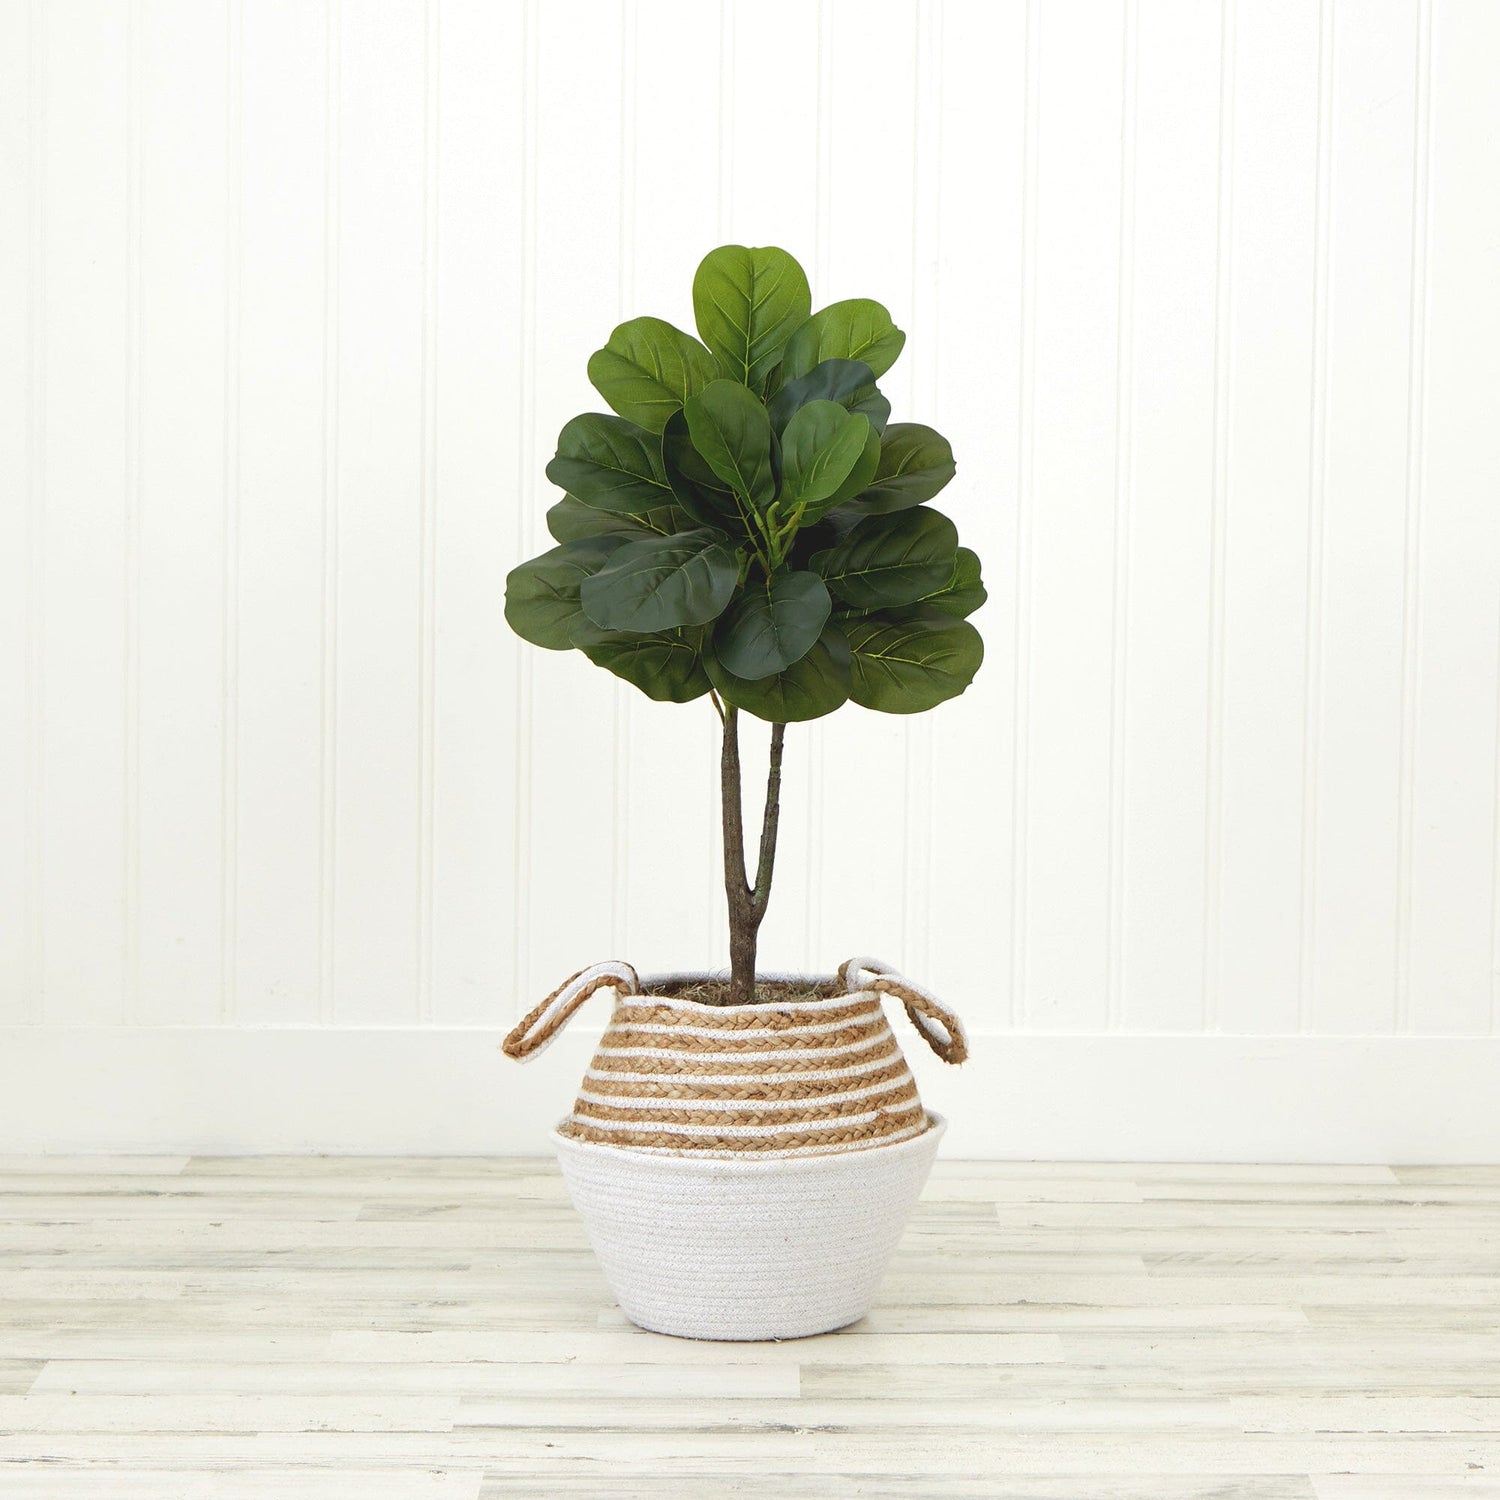 3' Artificial Fiddle Leaf Fig Tree with Handmade Cotton & Jute Woven Basket DIY Kit